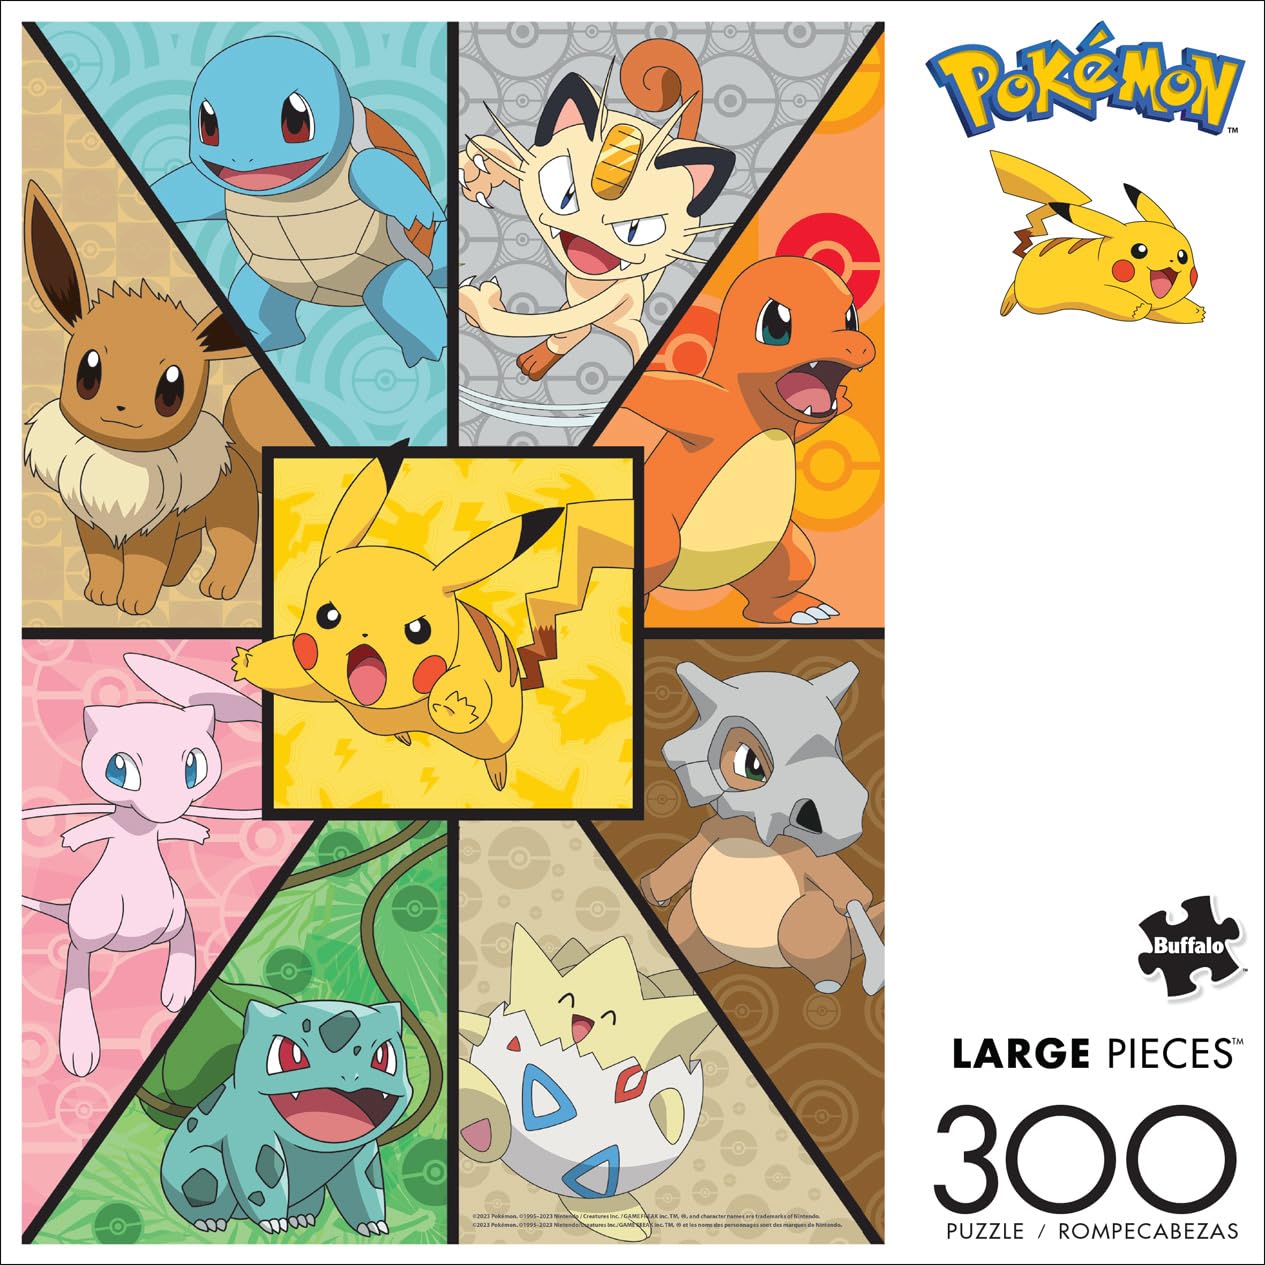 Buffalo Games - Pokemon - Kanto Companions - 300 Large Piece Jigsaw Puzzle for Adults Challenging Puzzle Perfect for Game Nights - Finished Size 21.25 x 15.00